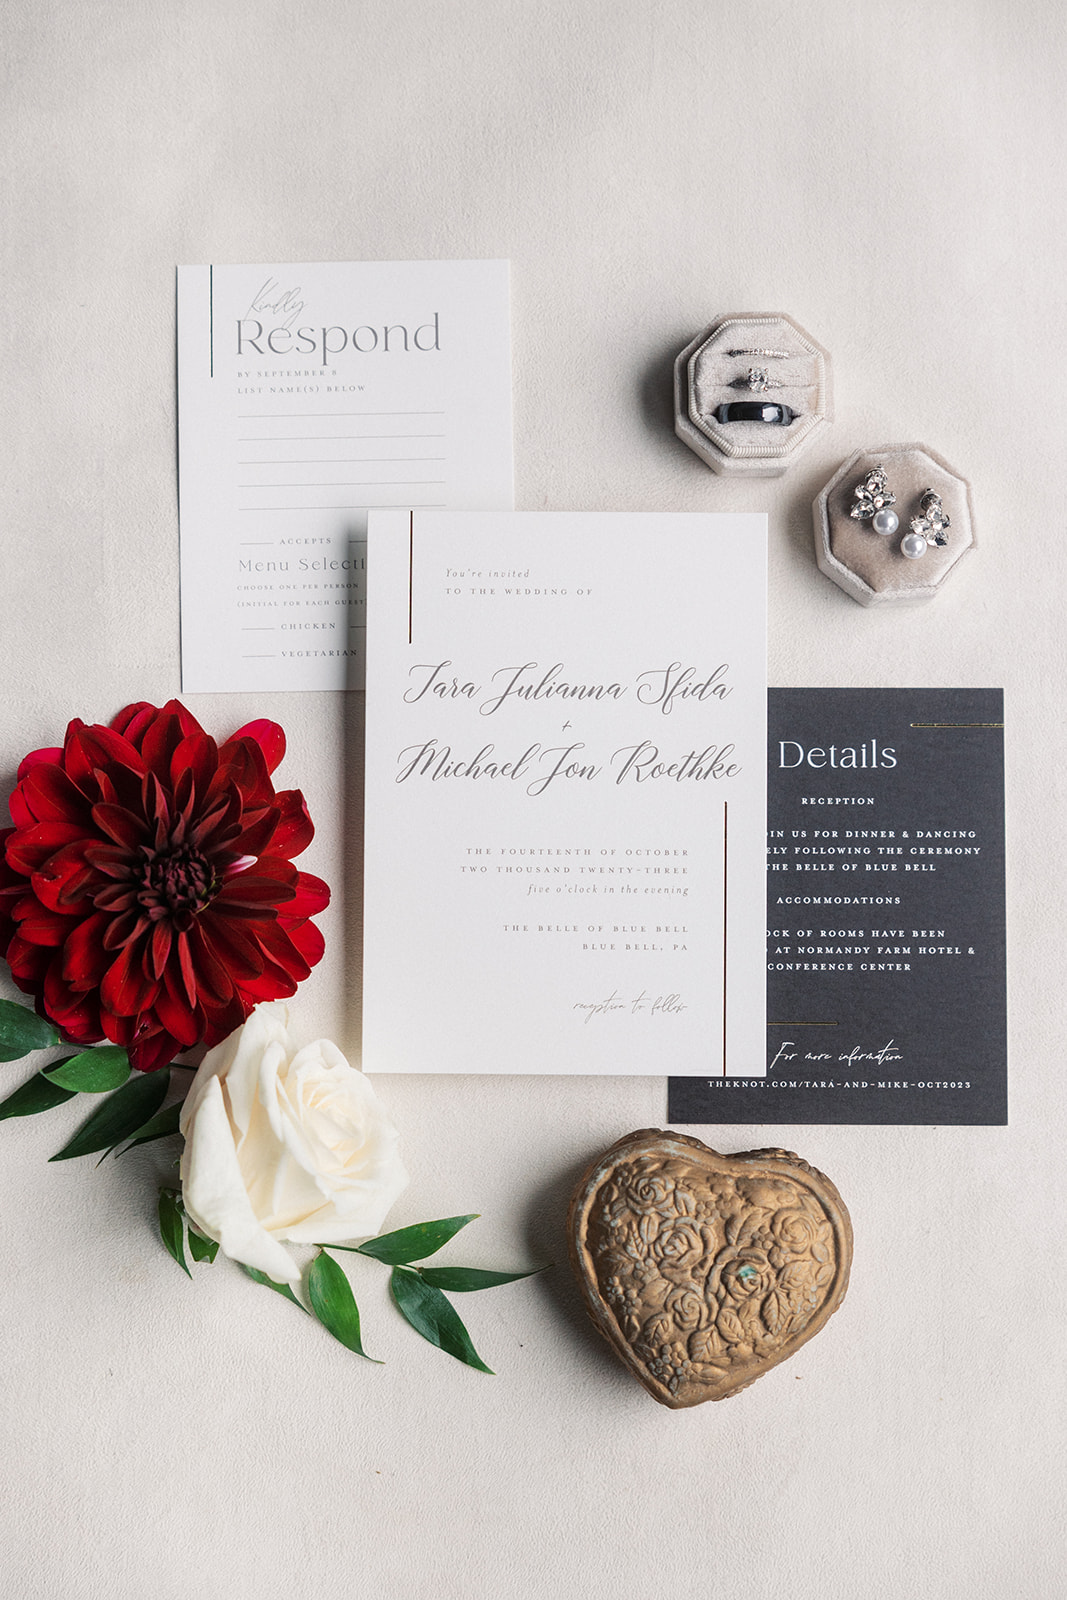 Details of wedding invitations, rings and earrings